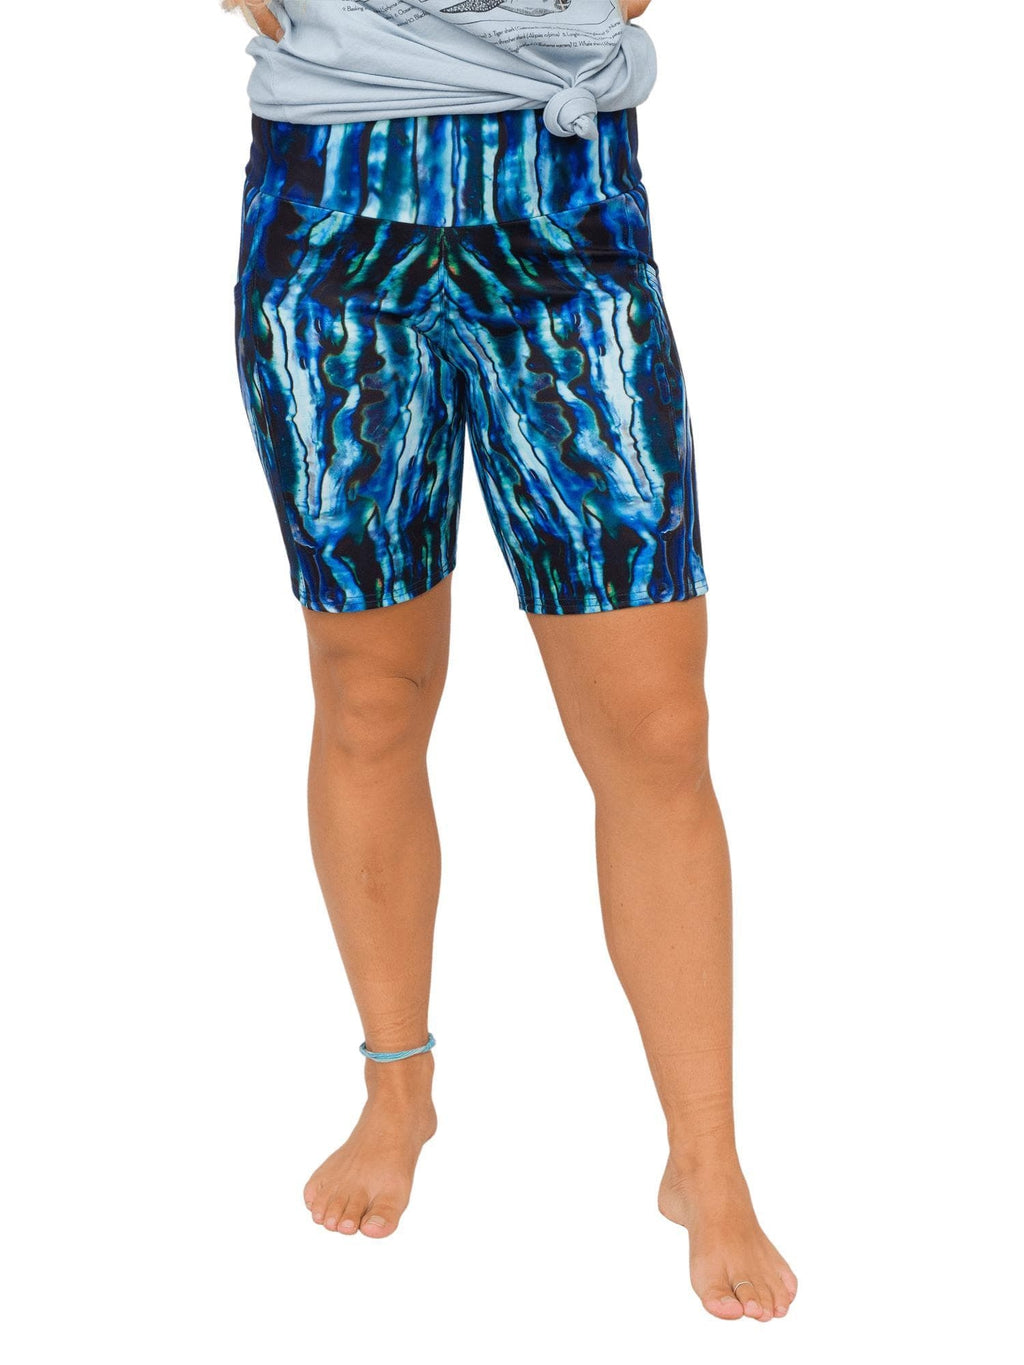 Model: Erin is a coral ecologist and Program Manager here at Waterlust. She 4&#39;11&quot;, 110 lbs and is wearing an XS.